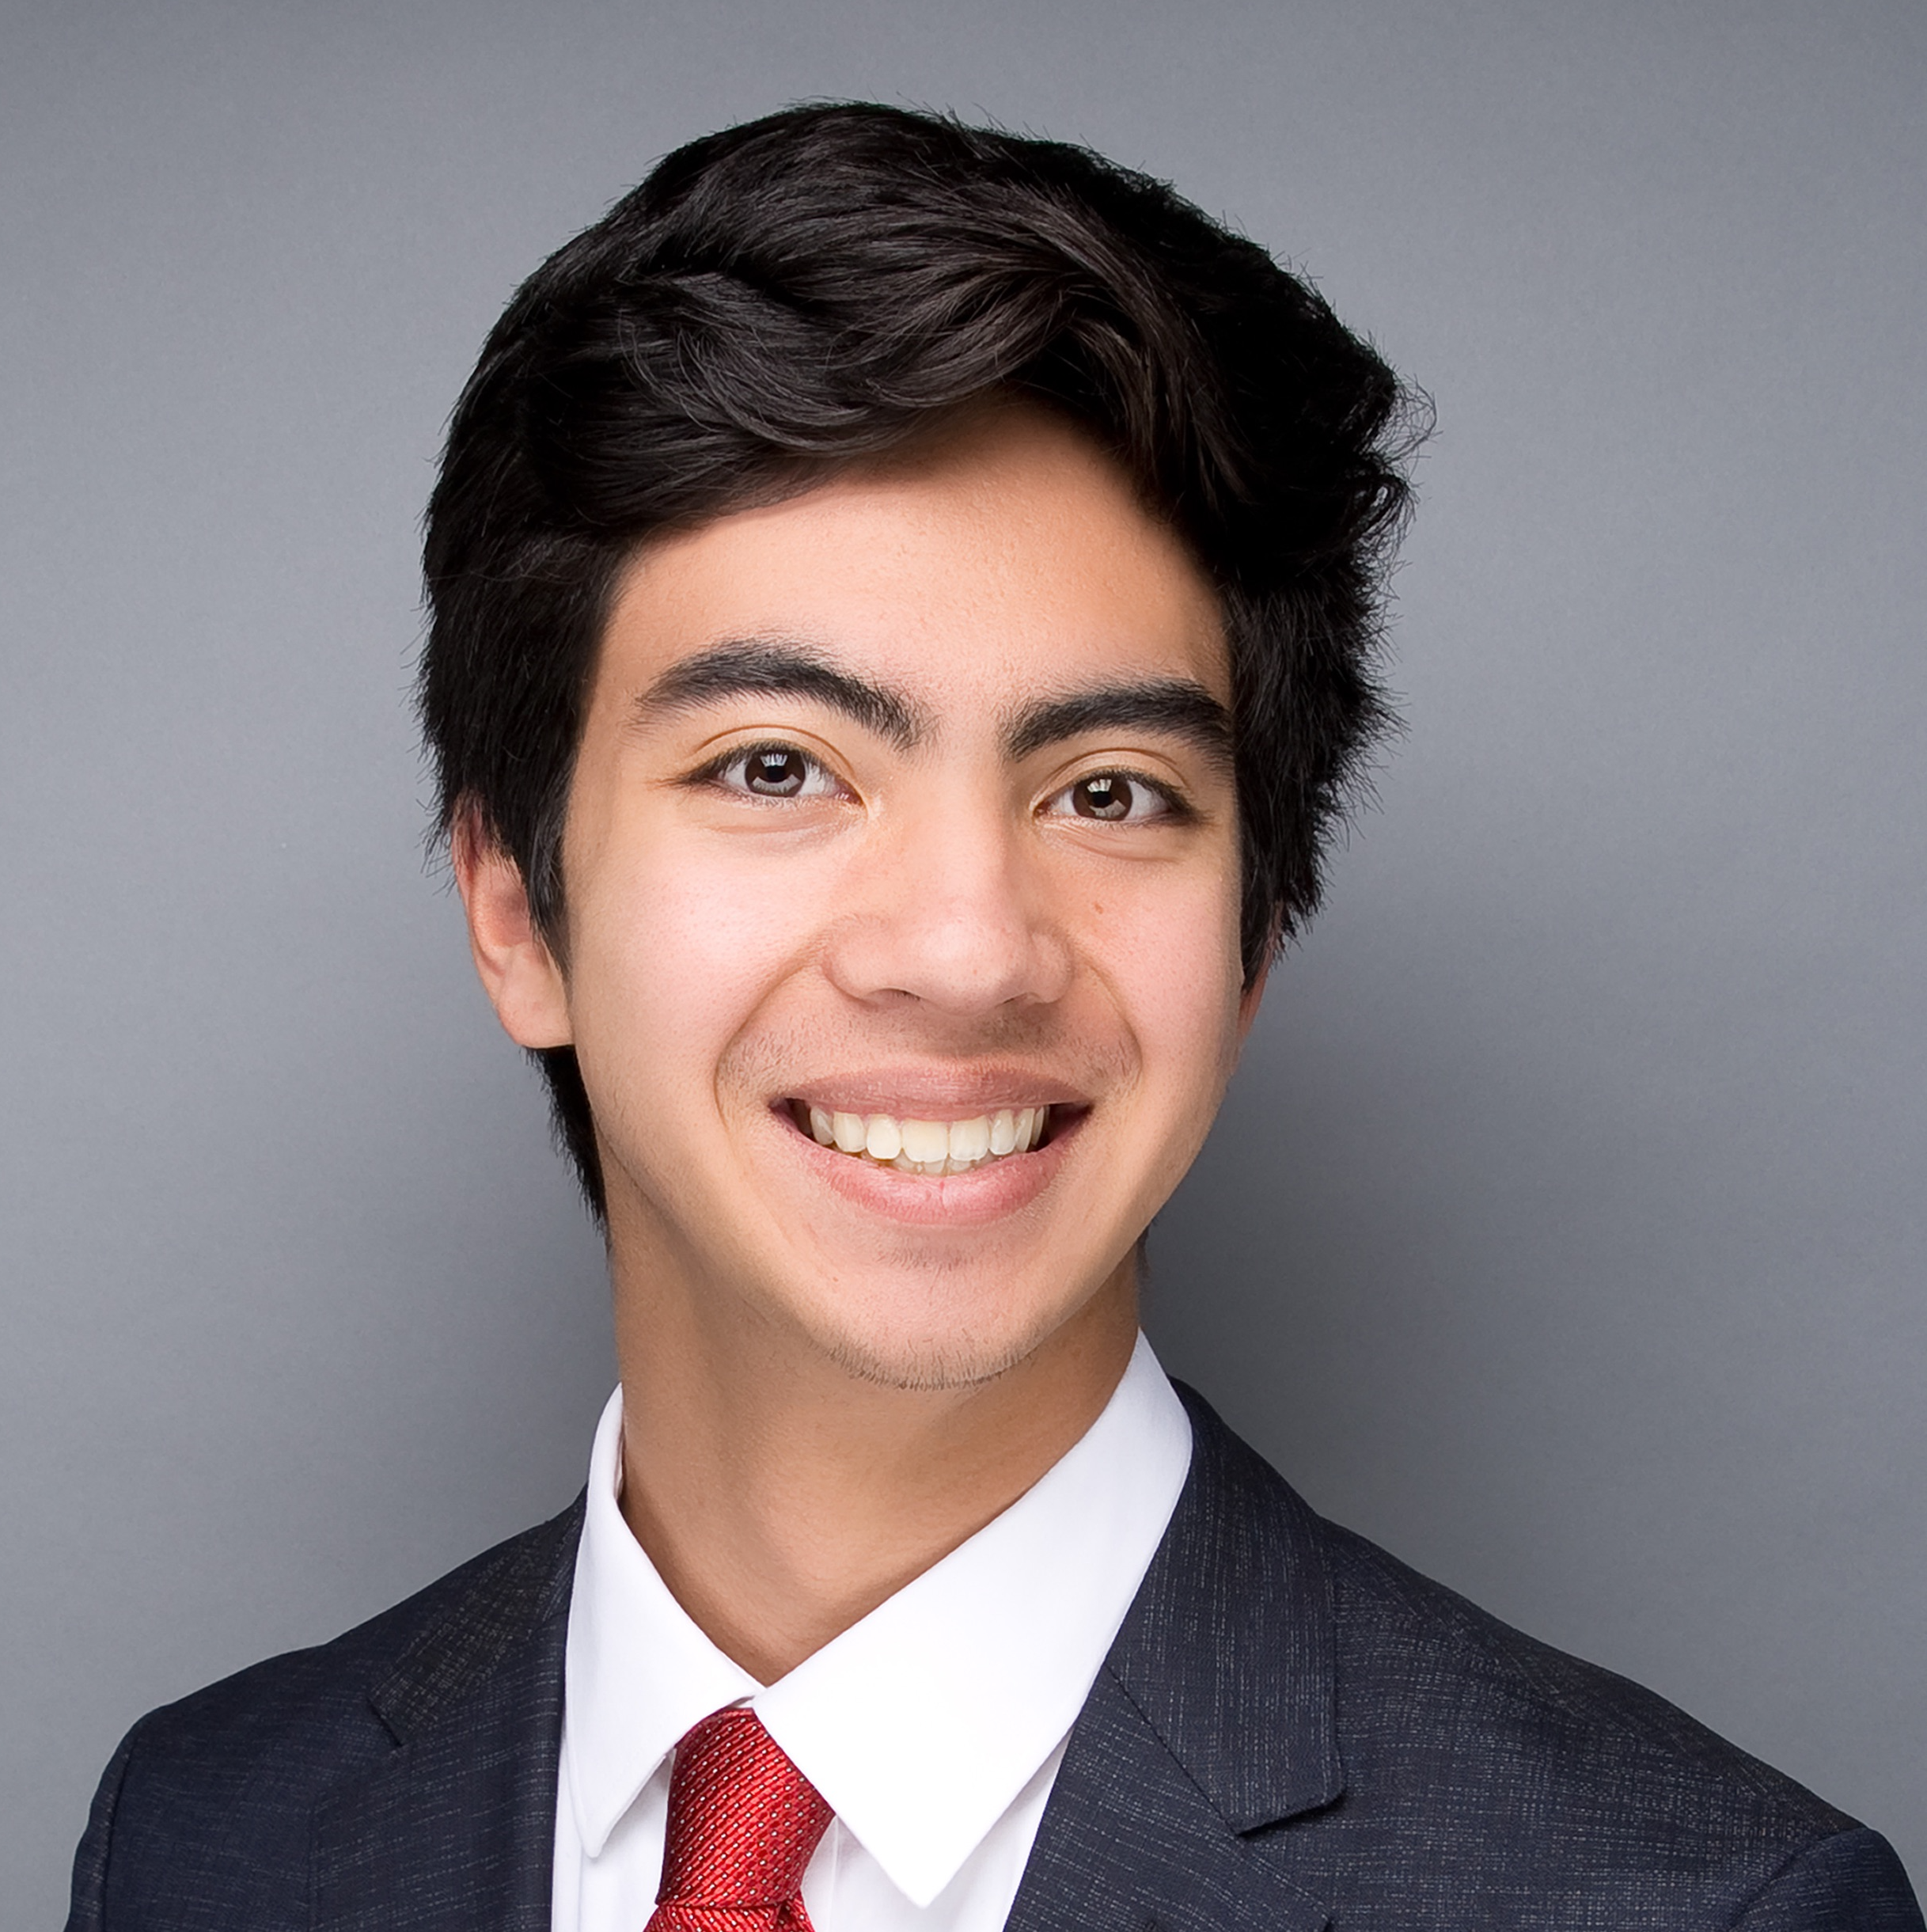 Julian Daszkal is an undergraduate student from South Florida majoring in International Affairs and Finance. He joined the GWUCUI in June 2020.